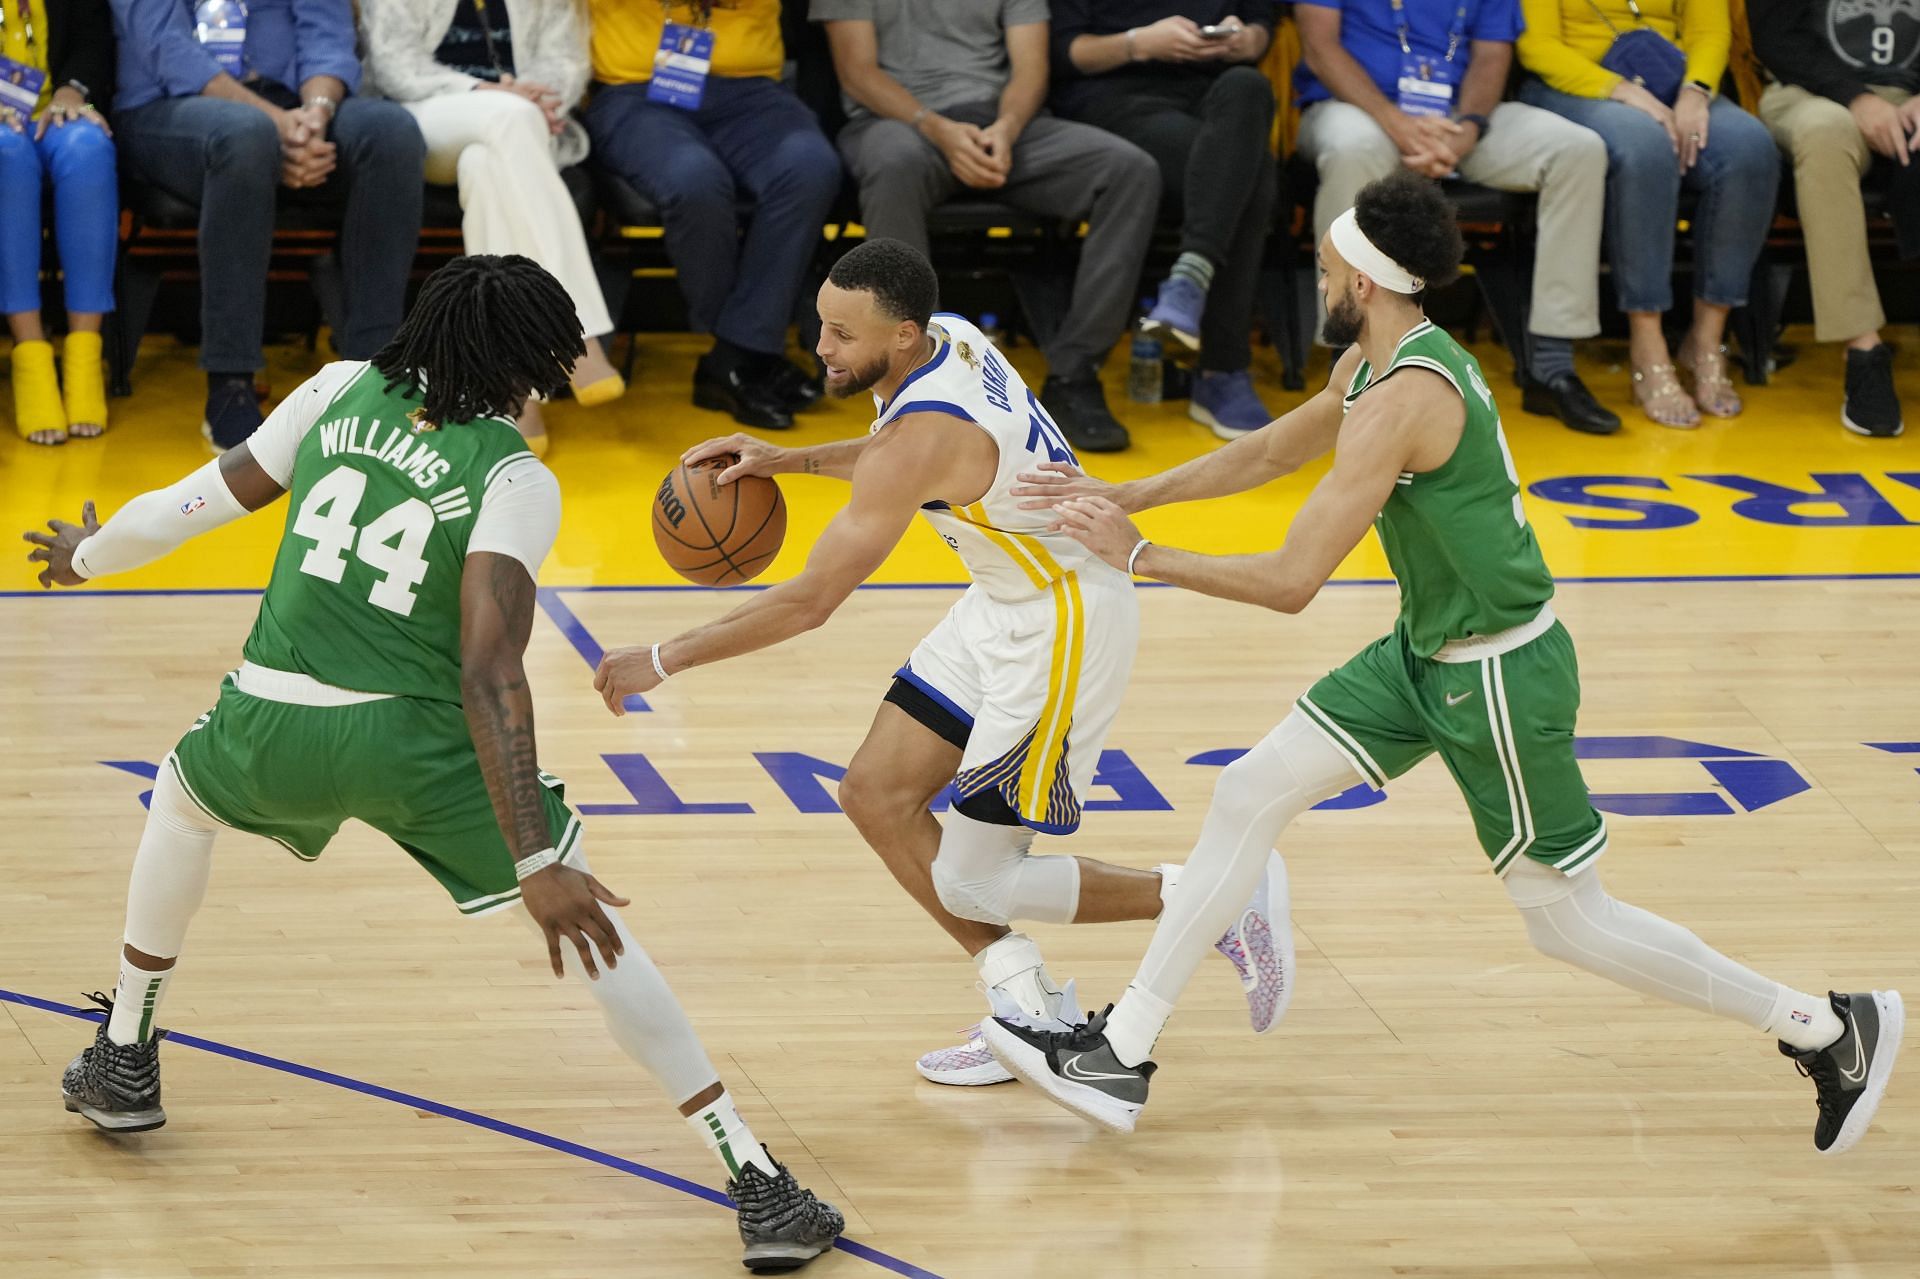 Steph Curry of the Golden State Warriors dribbles against Robert Williams III and Derrick White.